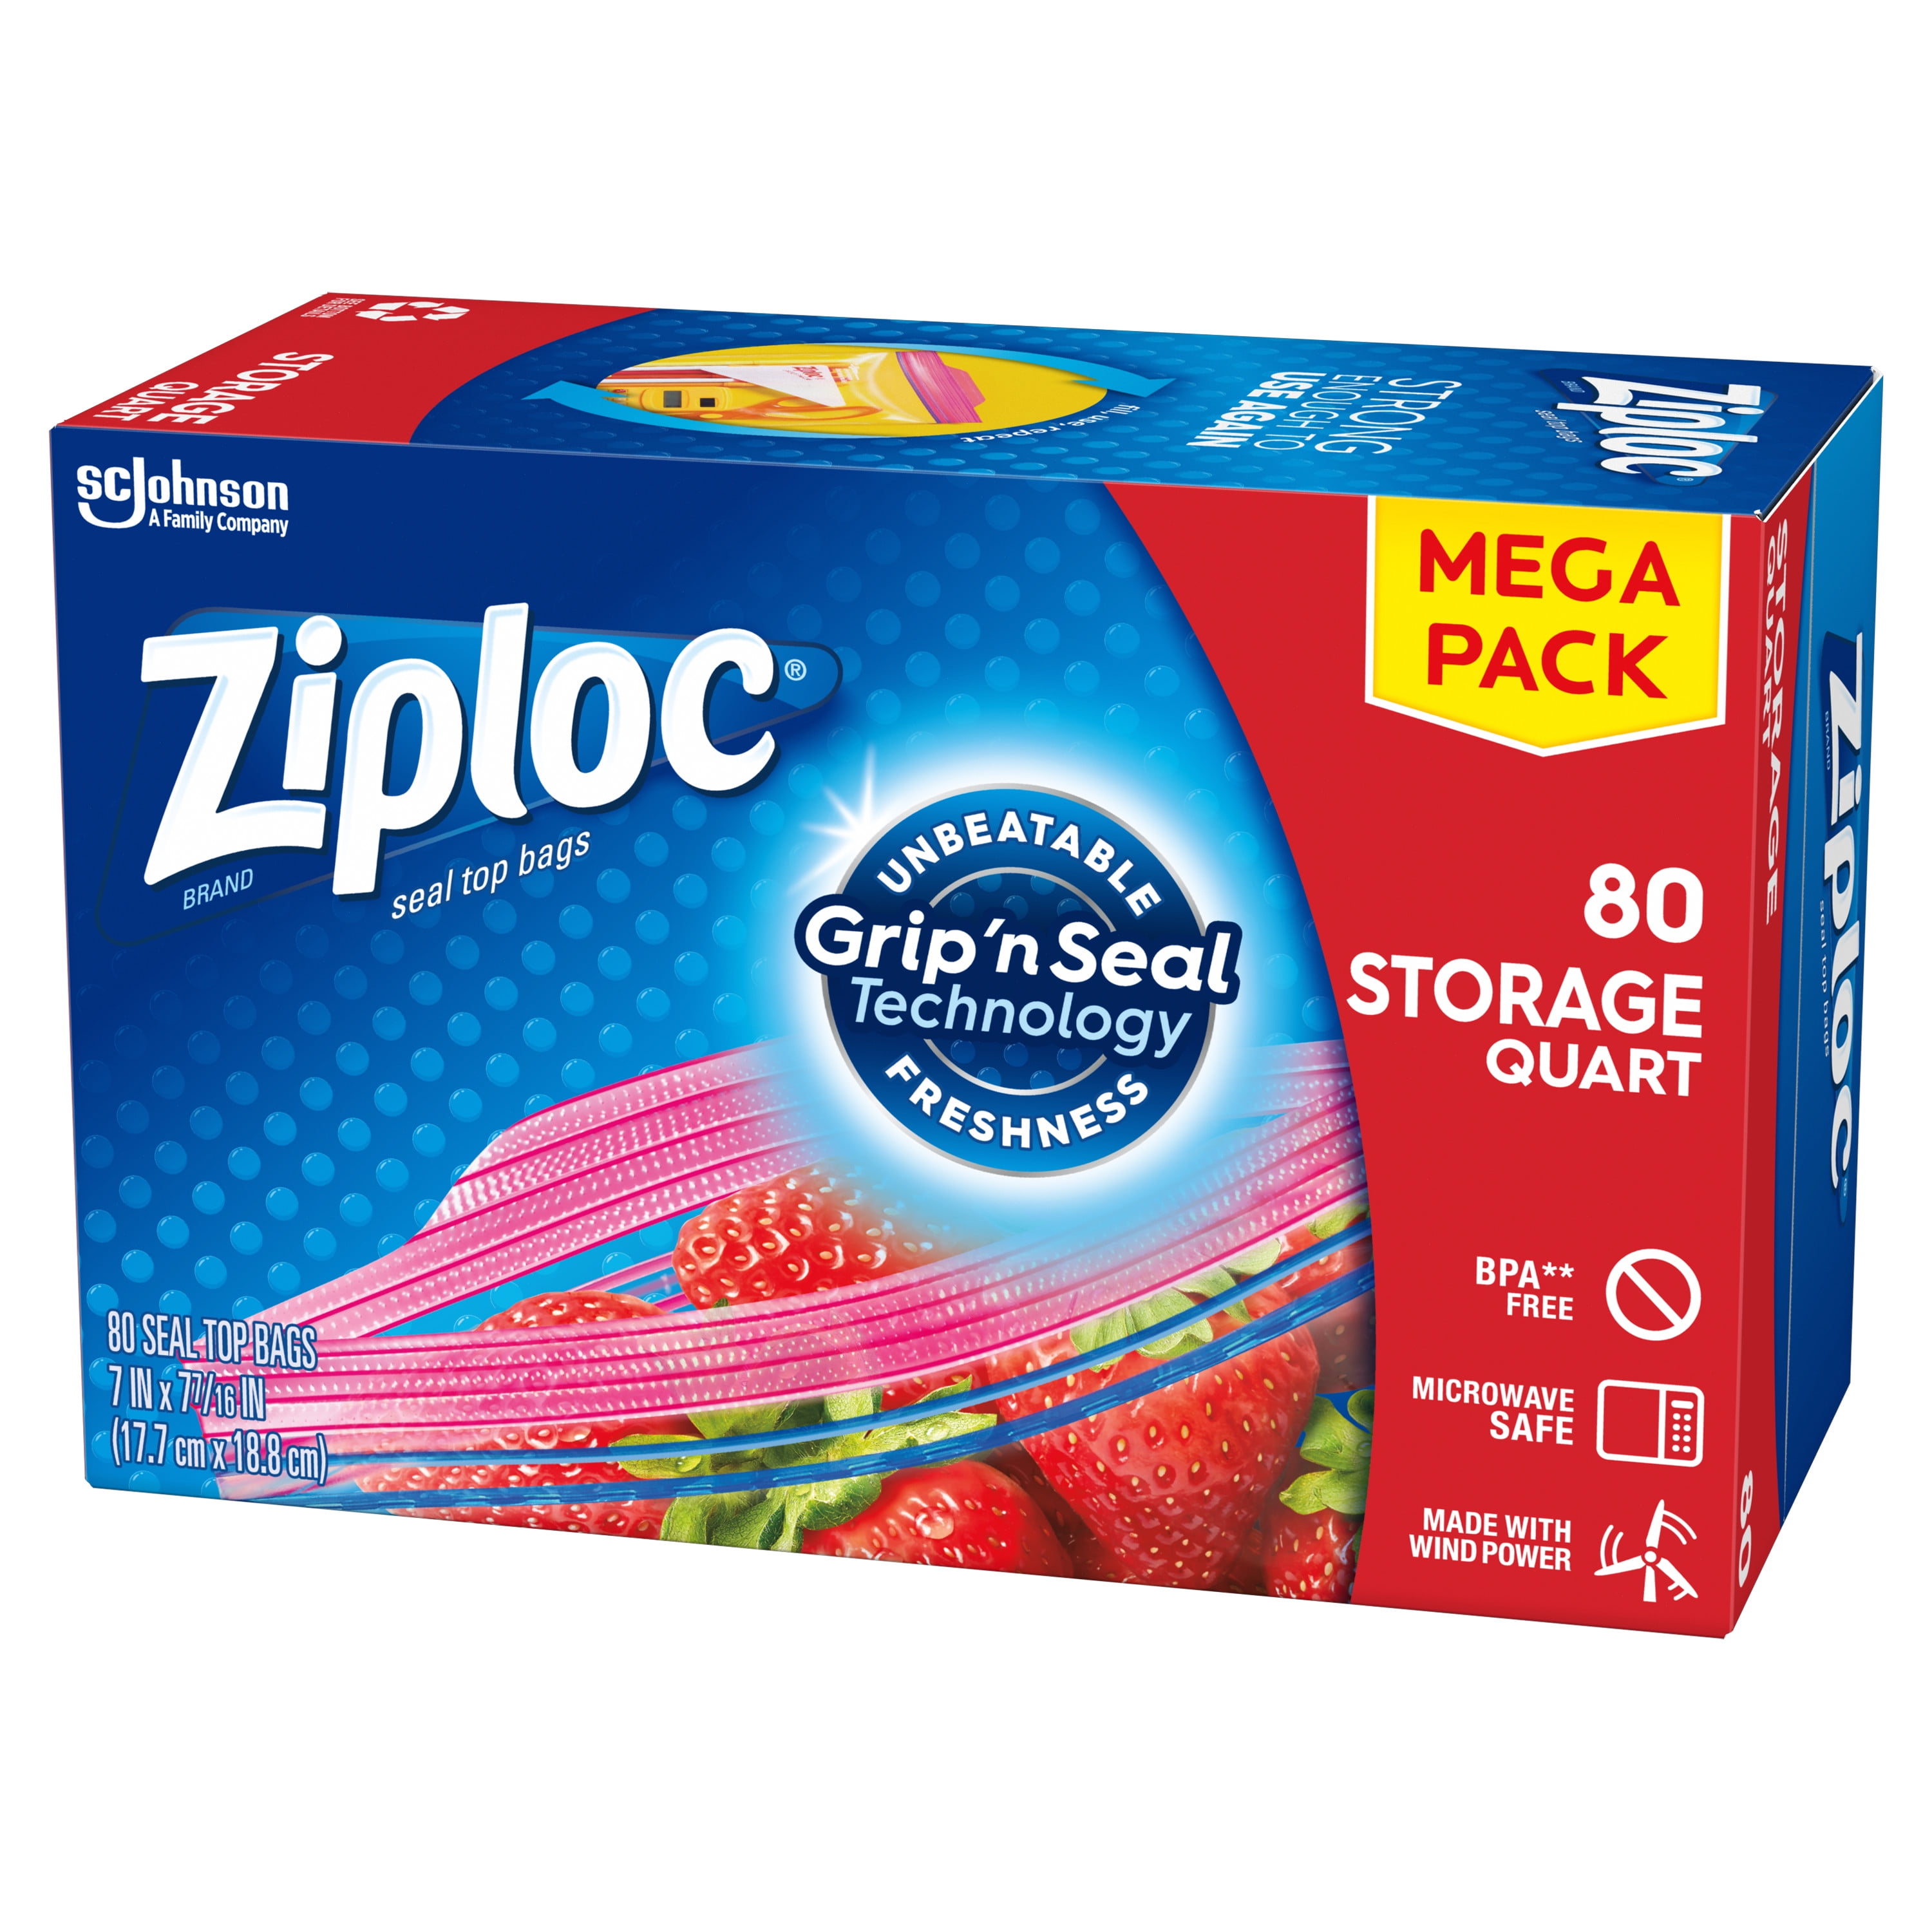 Ziploc Easy Zipper Variety Pack - 140 Bags(including 80 Quart Size Bags &  60 Gal